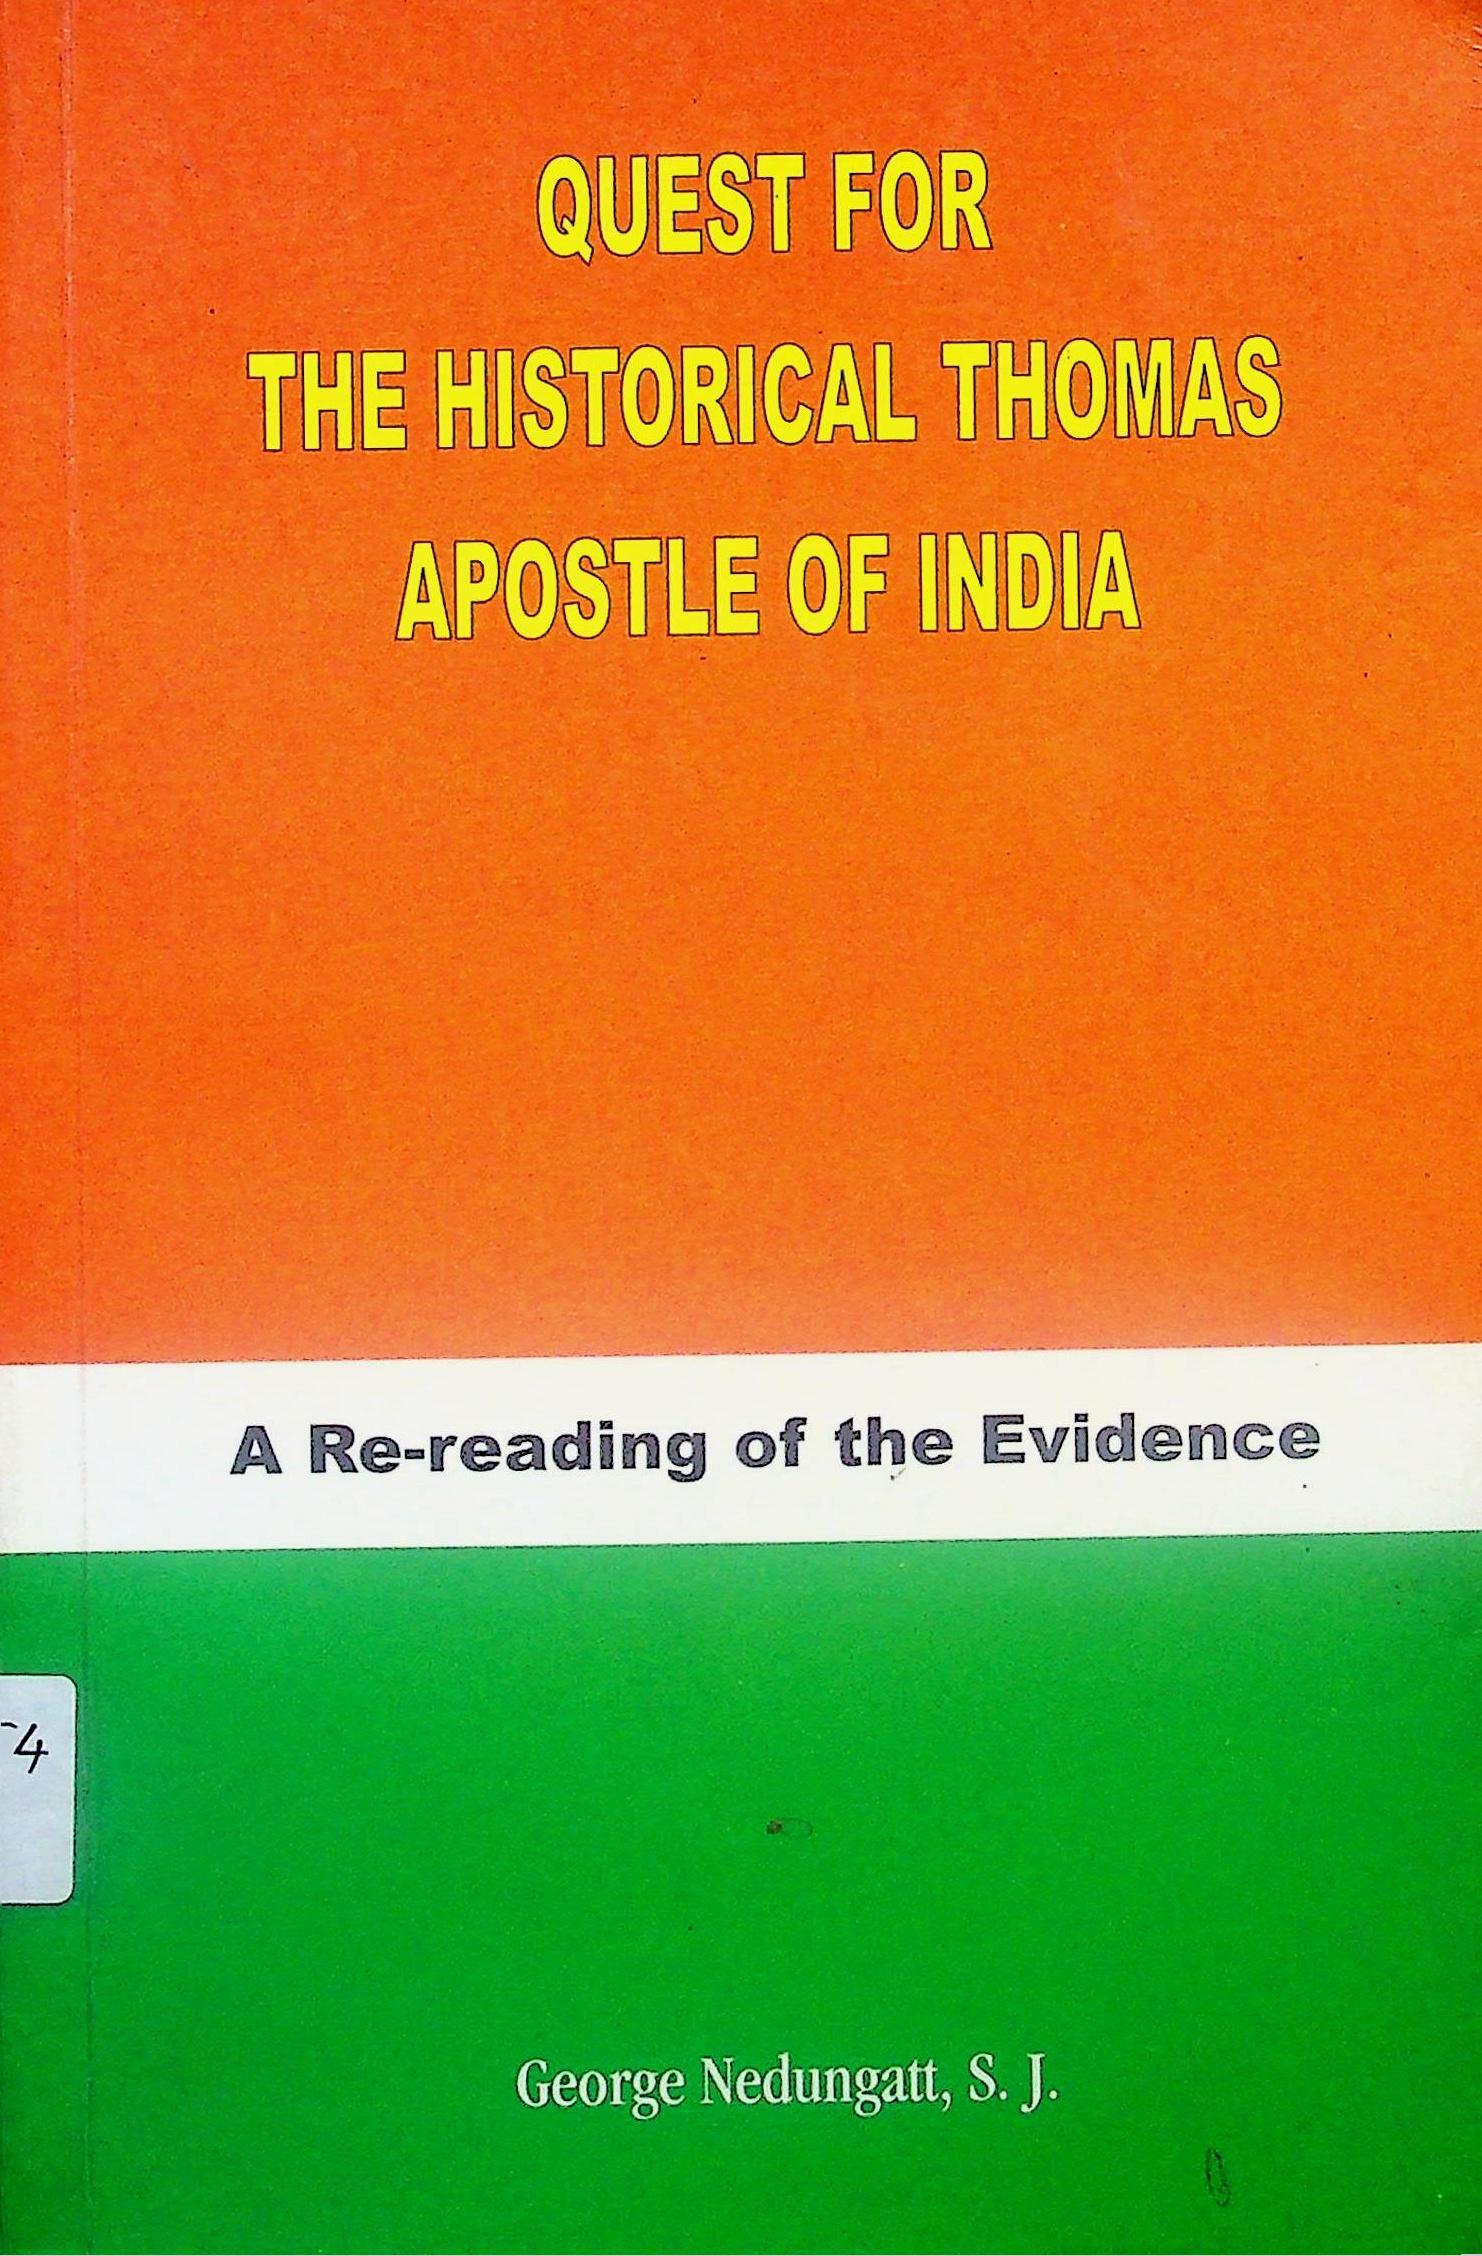 Quest for the Historical Thomas Apostle of India